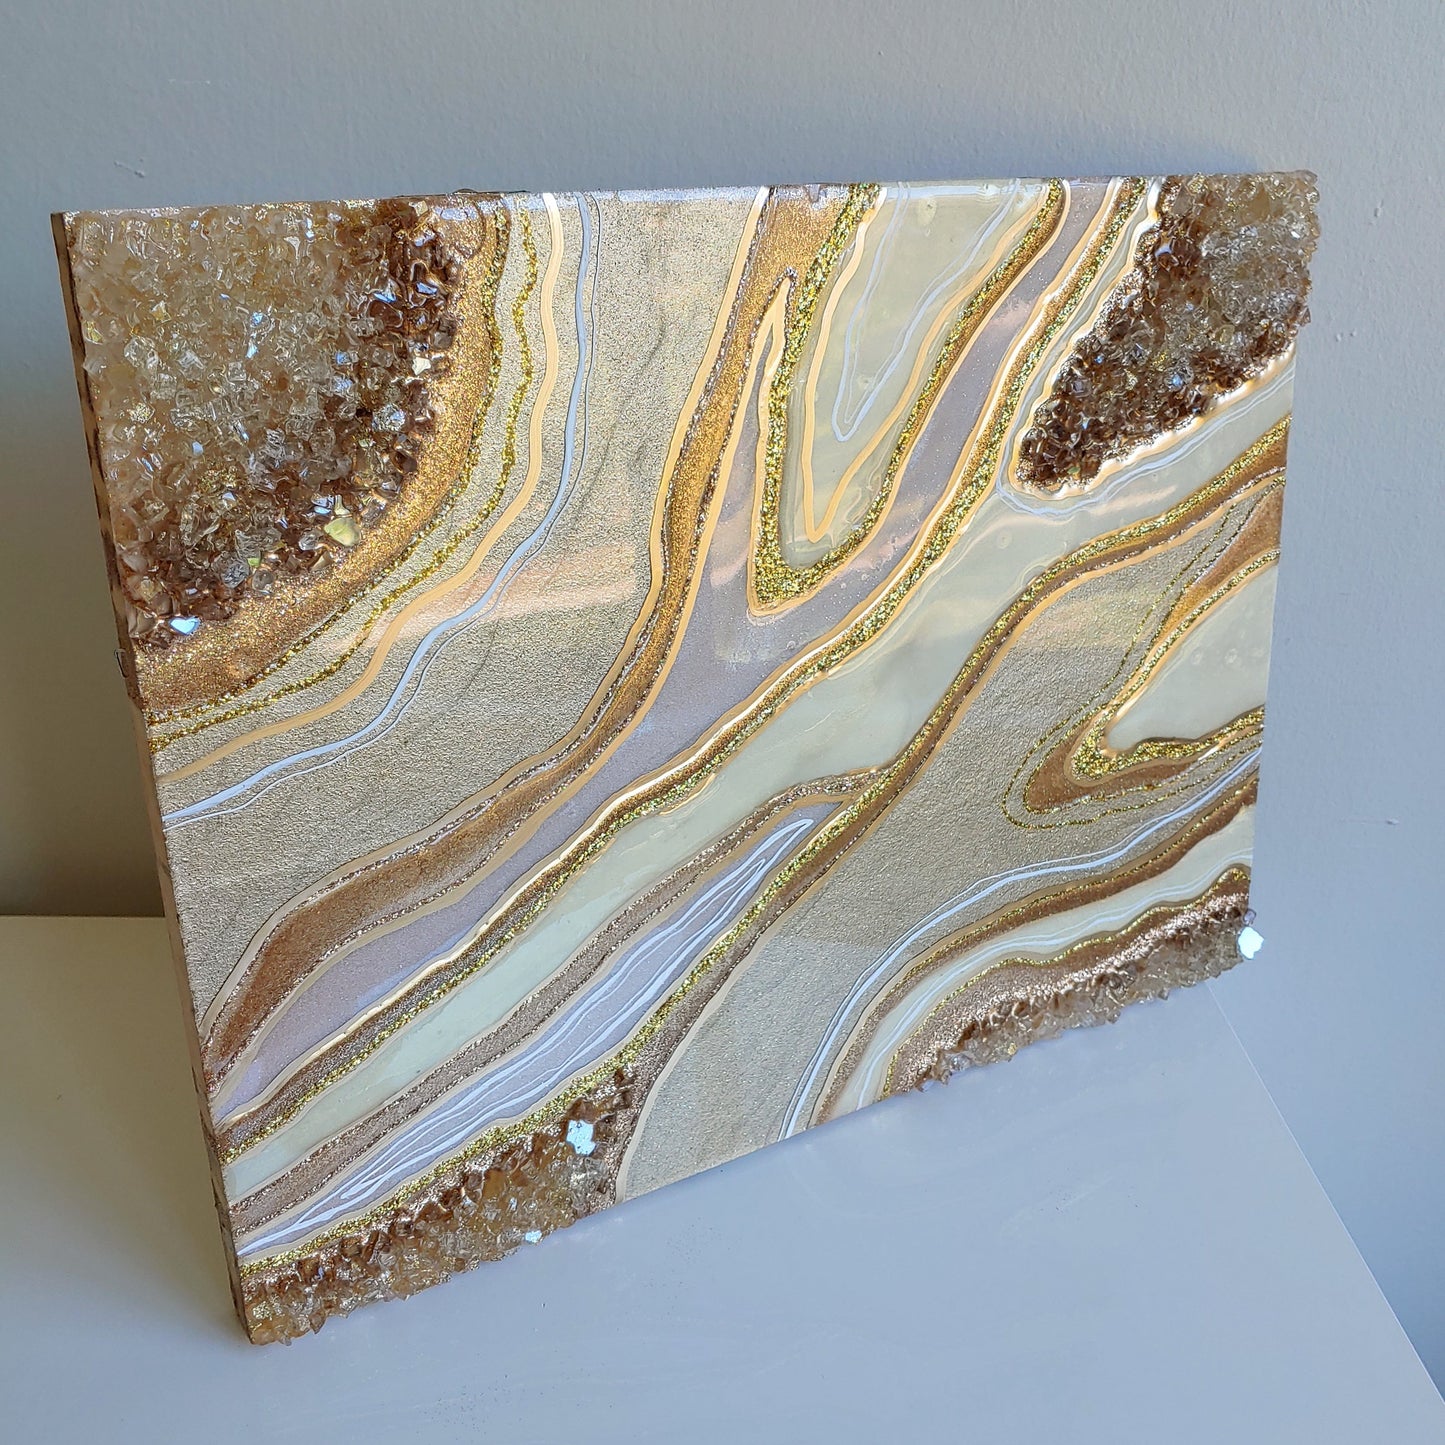 Cream and bronze artwork with glass on wood